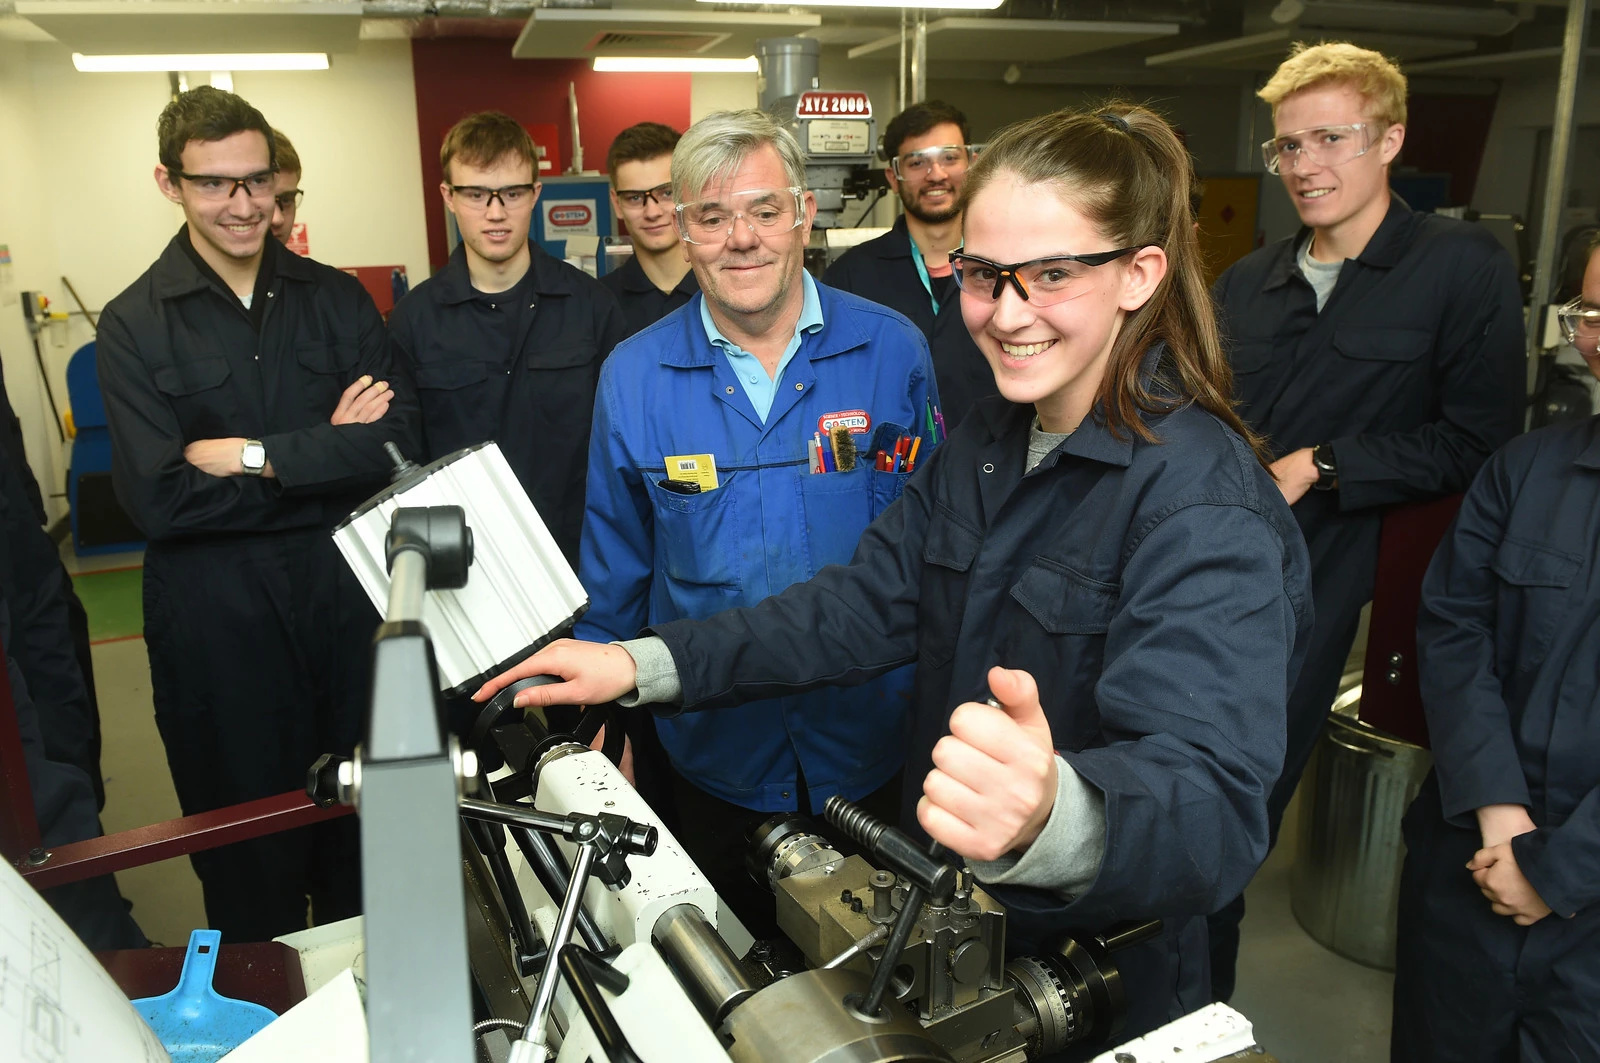 Middlesbrough College taught more than 200 Durham University students a thing or two thanks to a unique engineering programme.